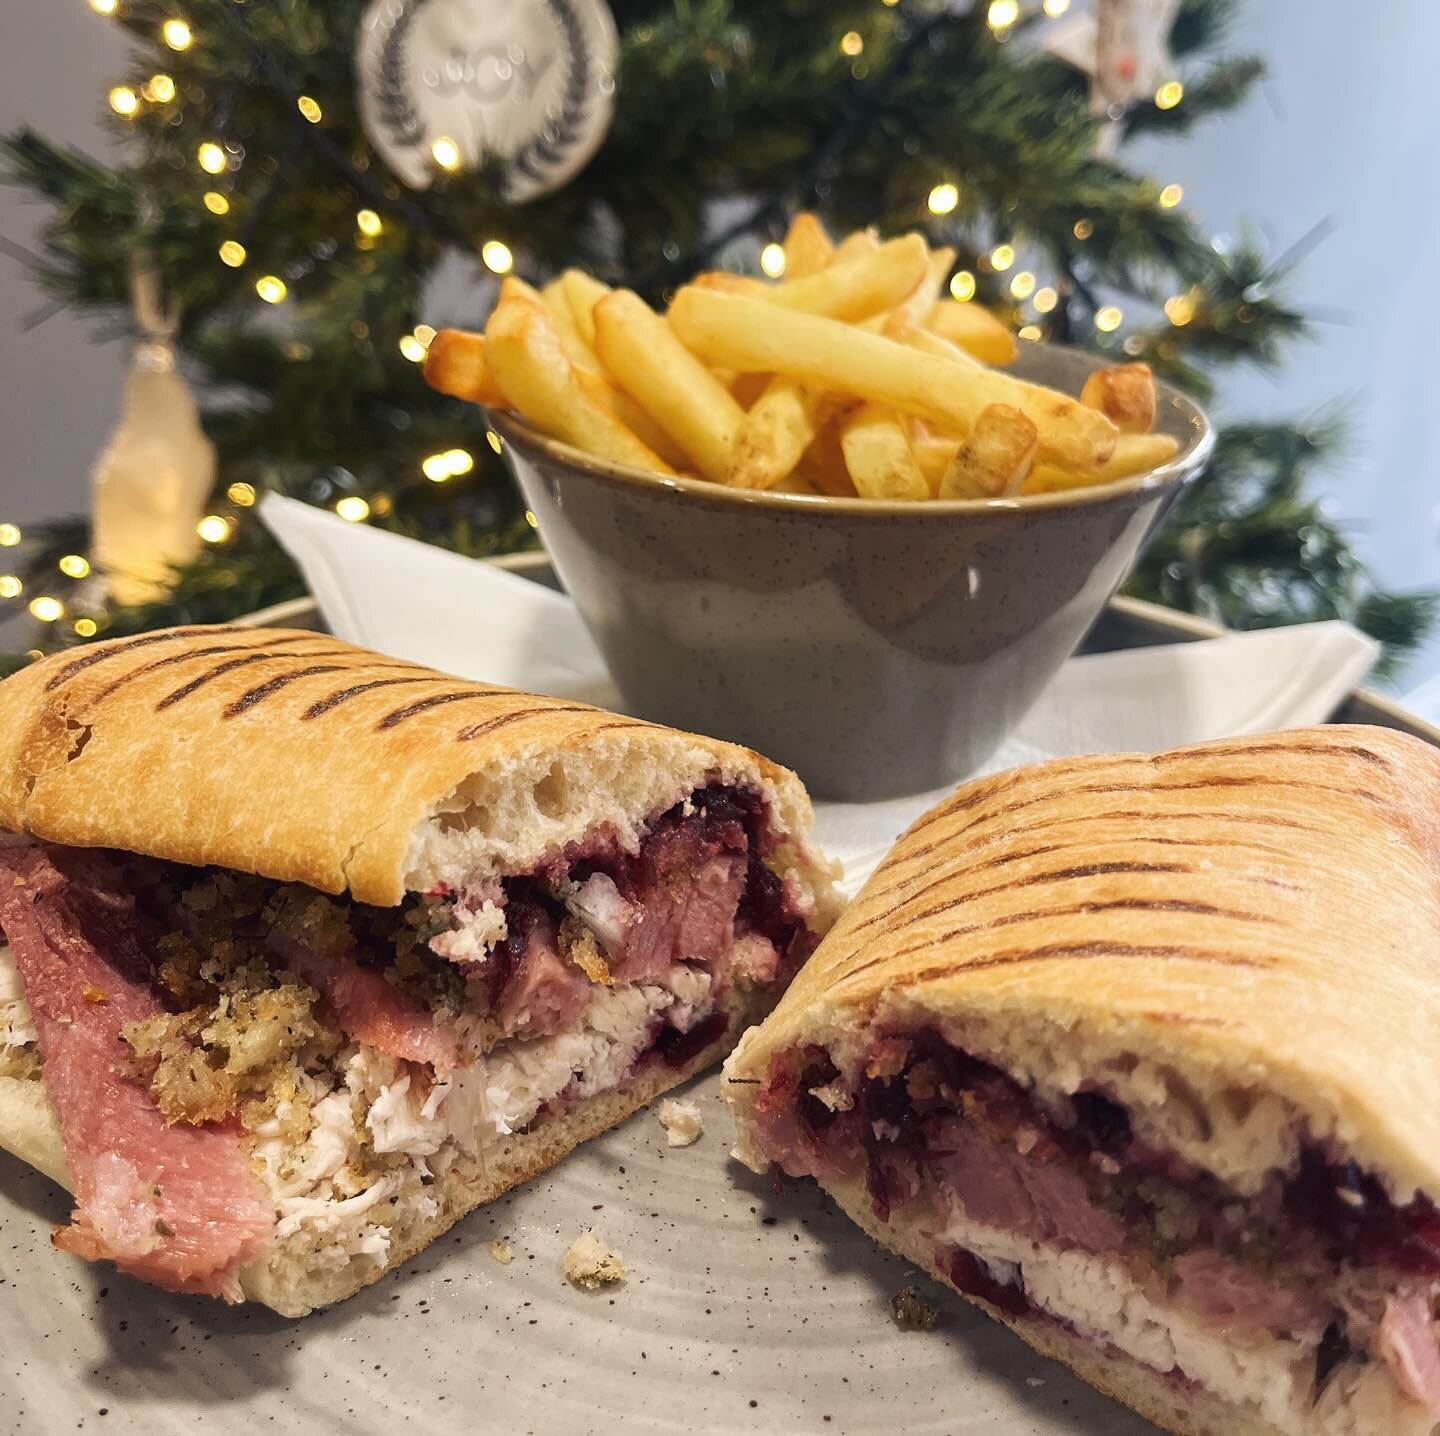 ✨🎄 Planning a little Christmas lunch with a friend? We&rsquo;ve got the perfect meal for you! Here&rsquo;s our Festive panini packed with freshly cooked local turkey &amp; ham right here in the cafe! ✨🎄